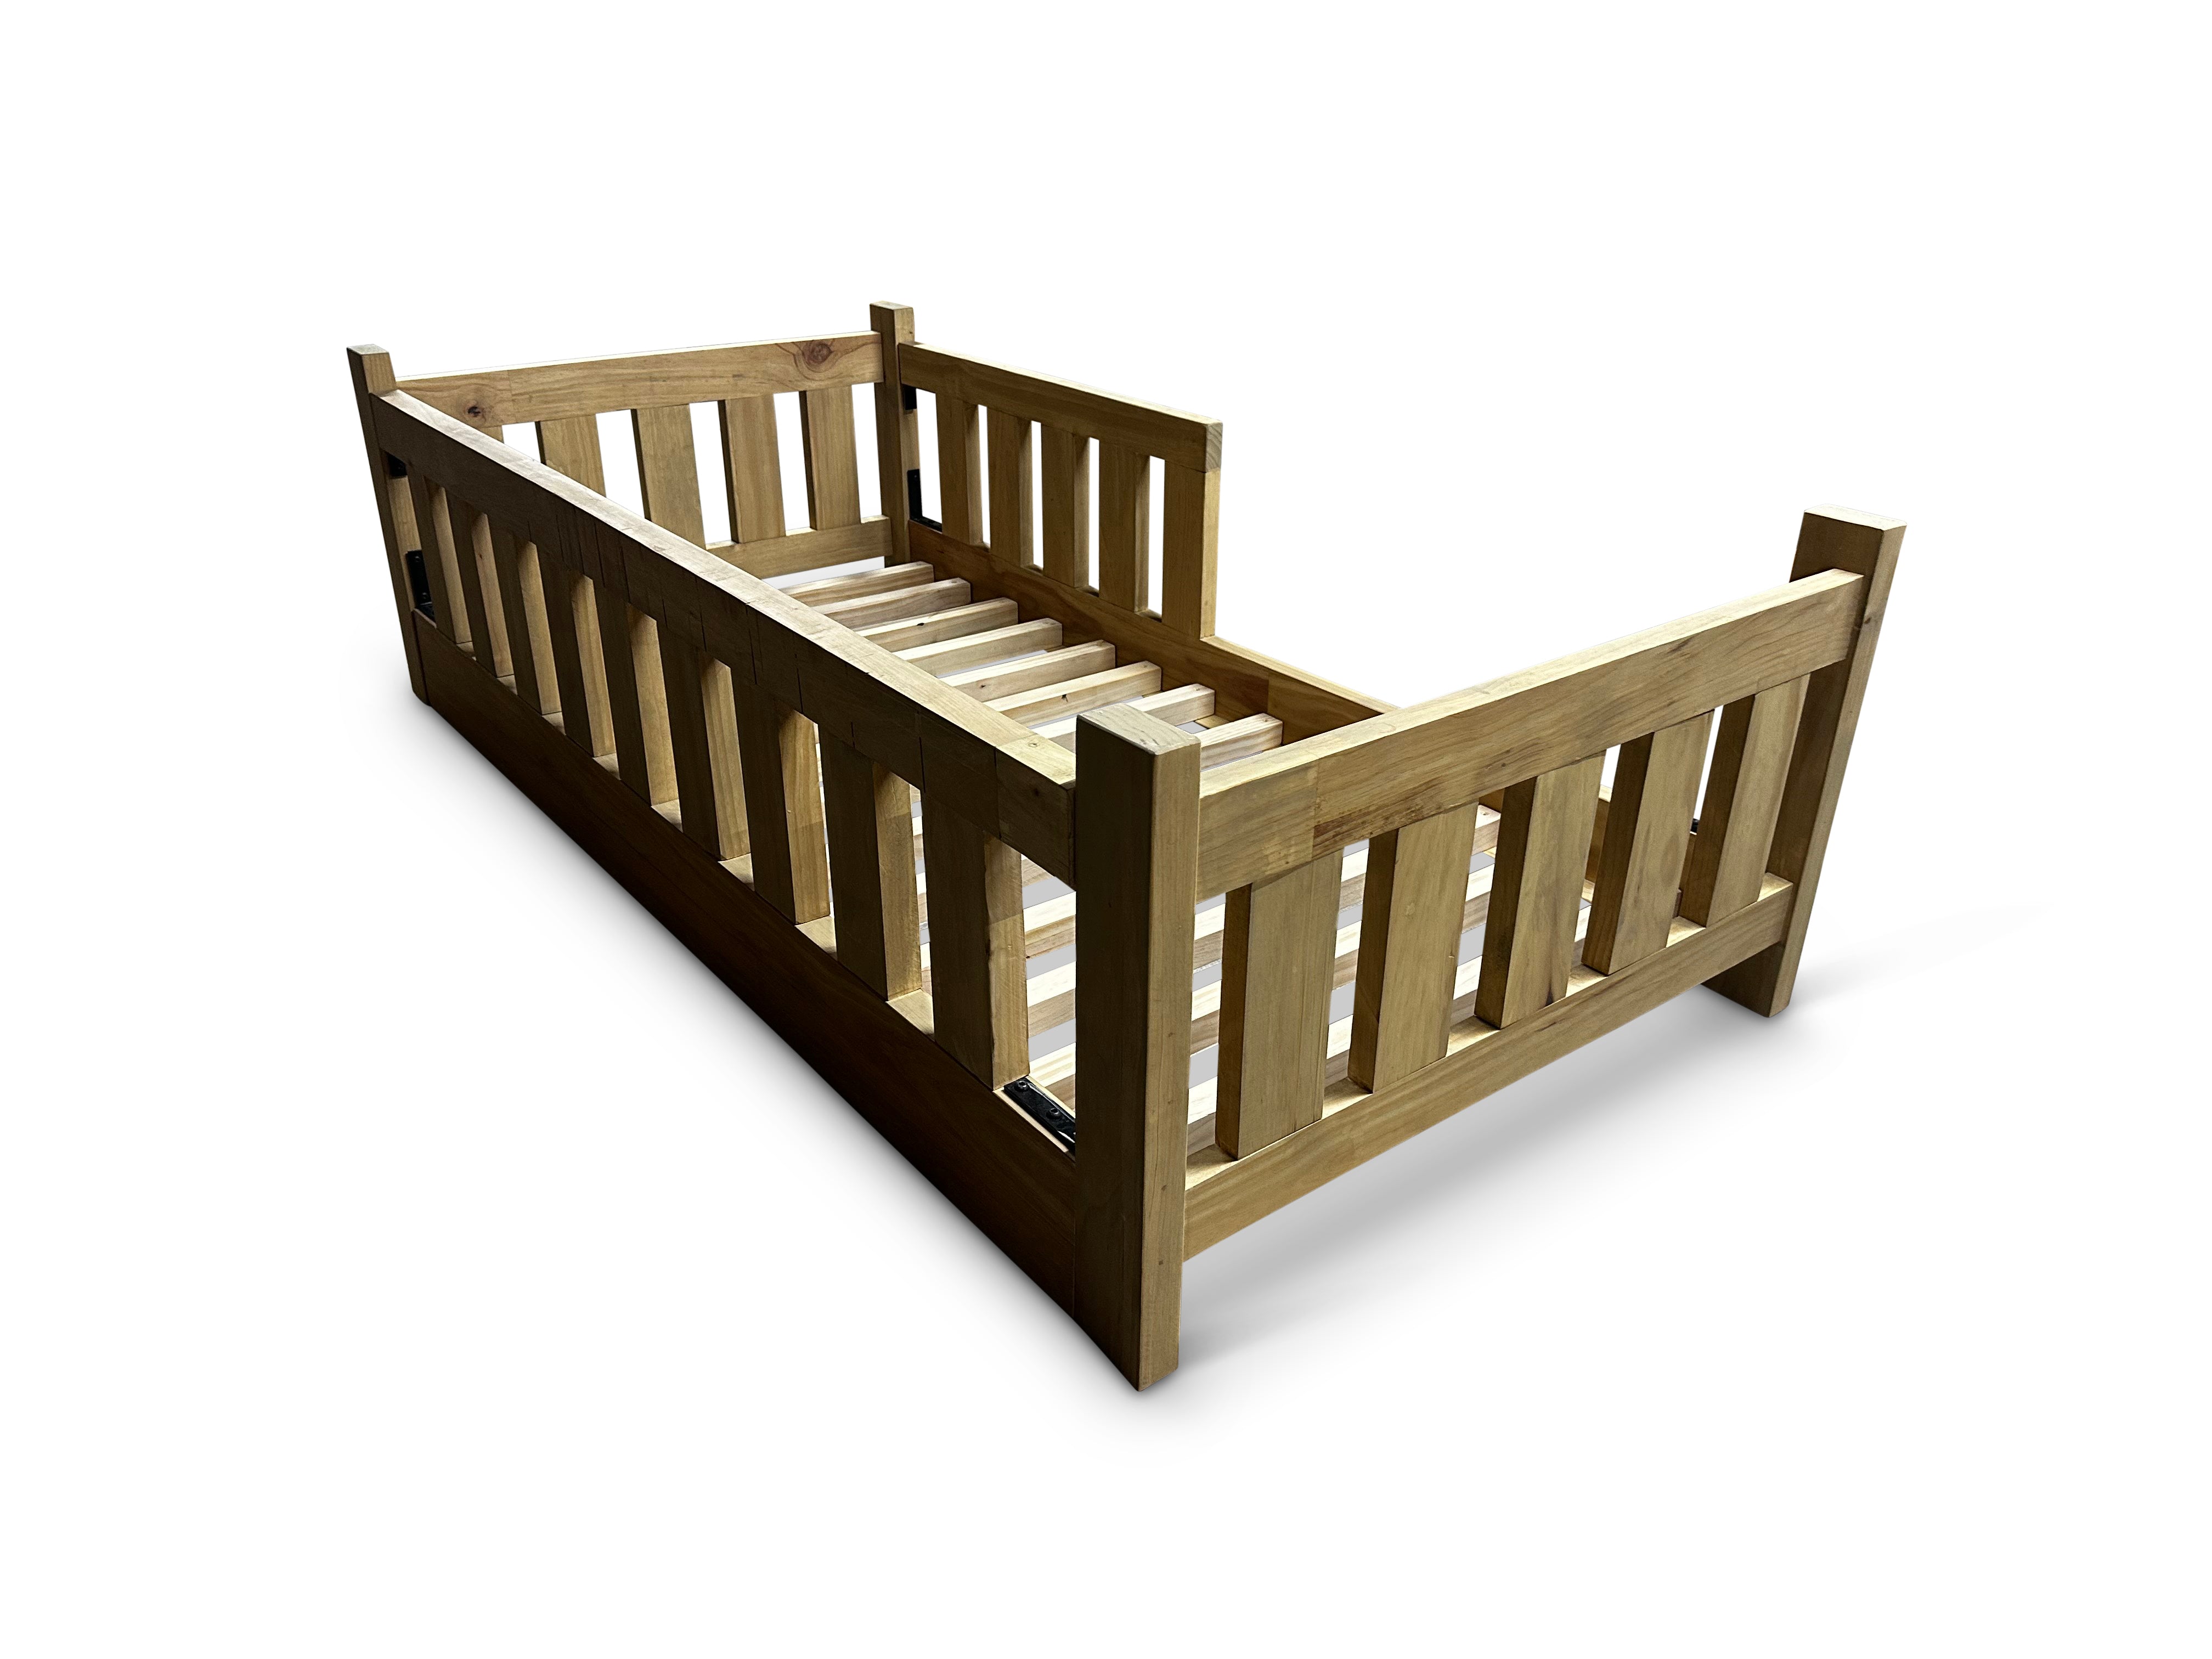 Toddler's Cot